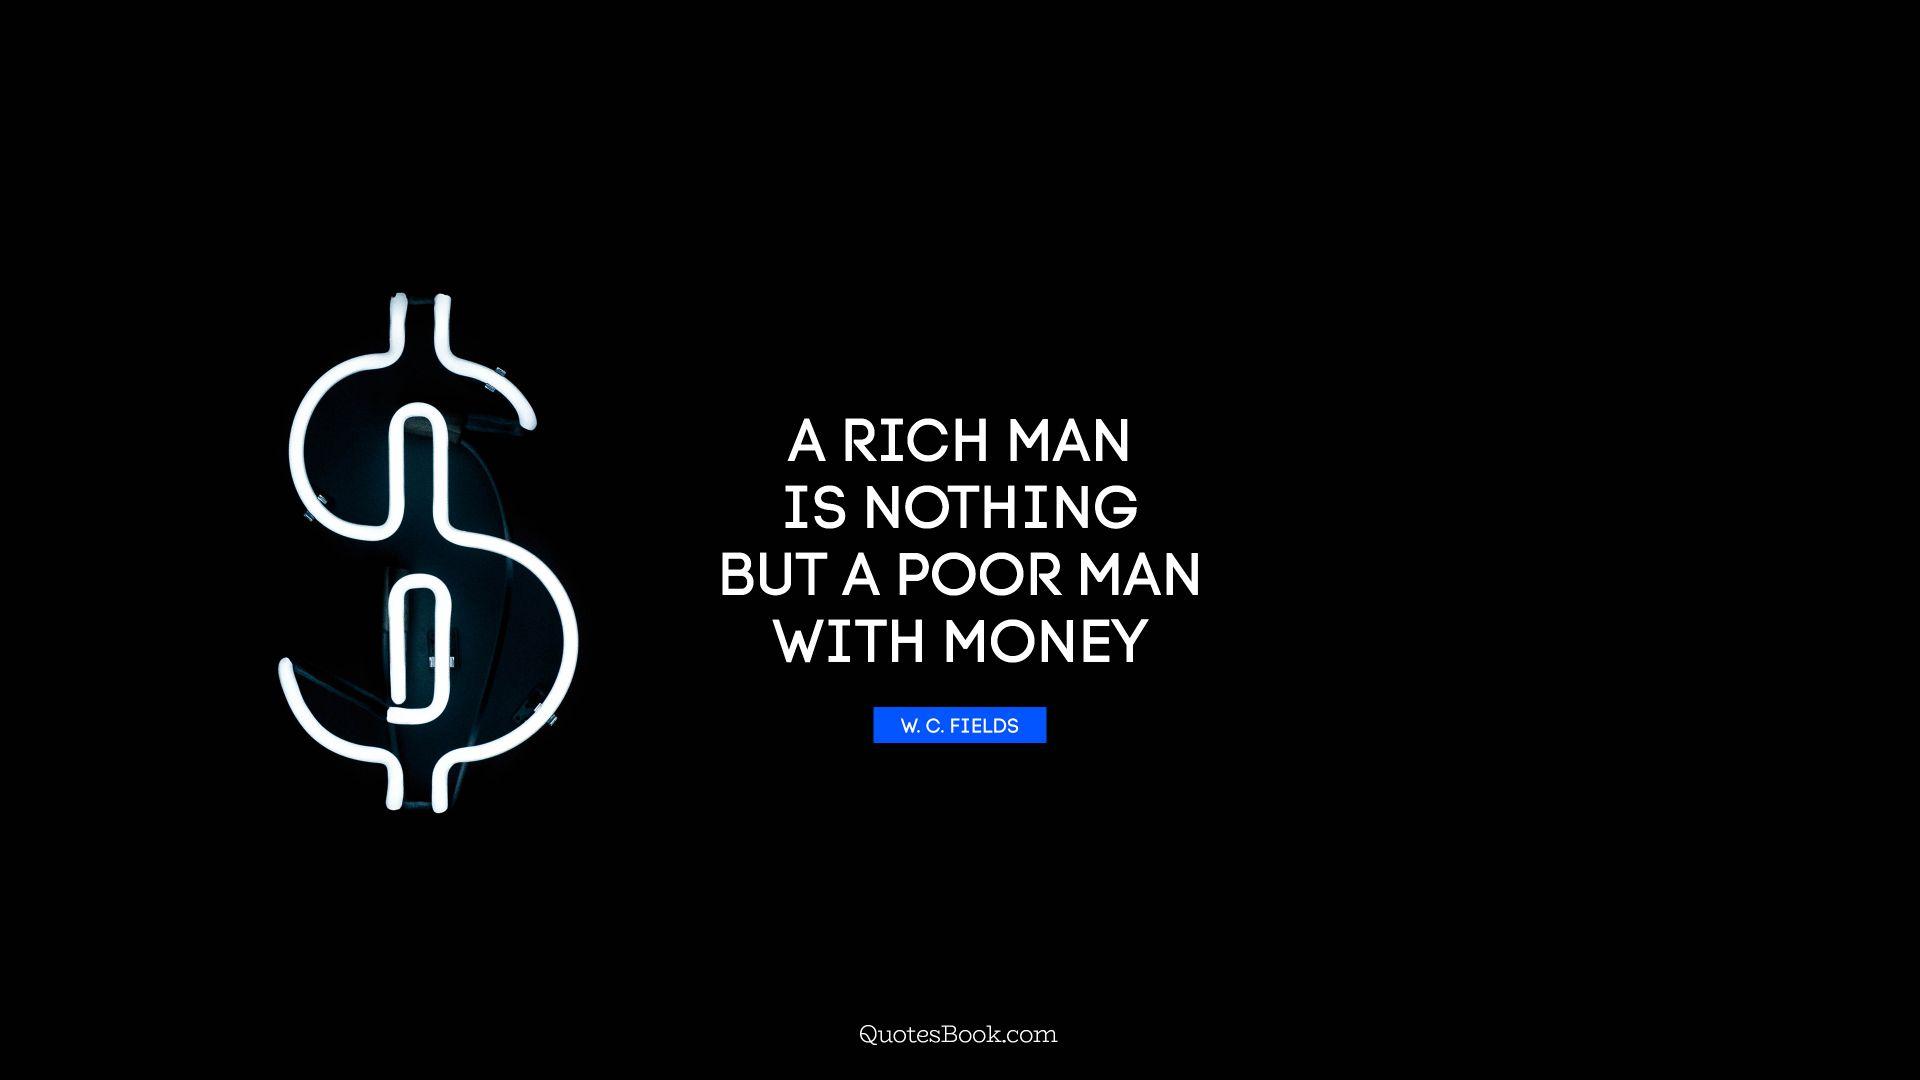 A rich man is nothing but a poor man with money. - Quote by W. C. Fields